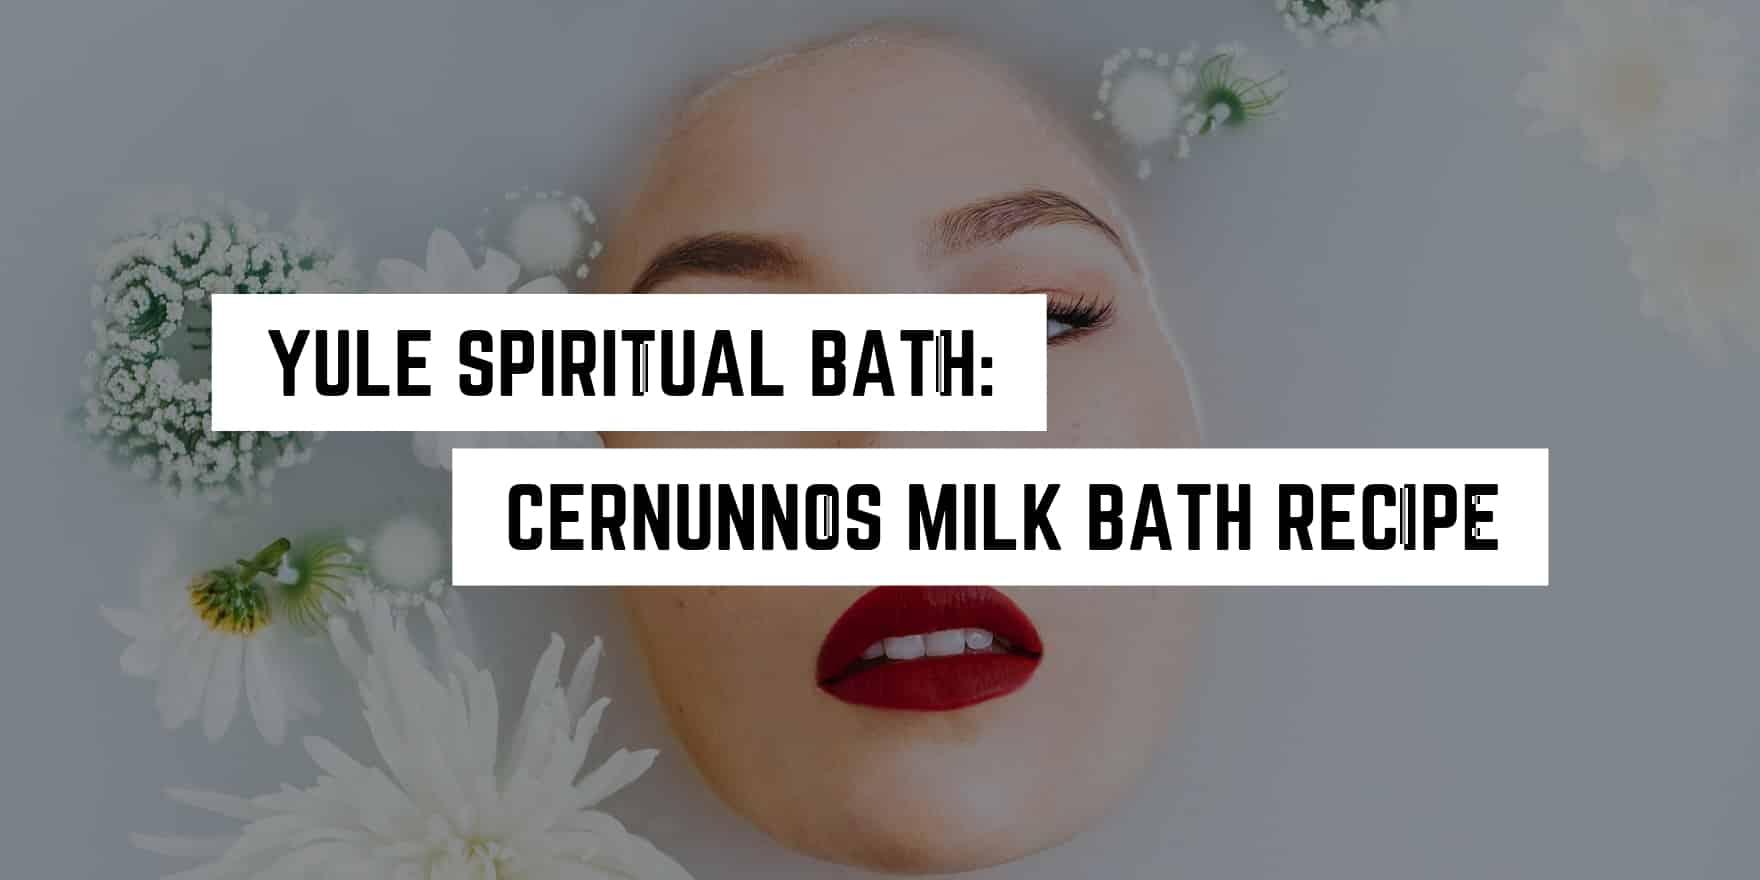 Relaxing in floral serenity: a rejuvenating milk bath experience inspired by ancient traditions and infused with witchy spirituality.